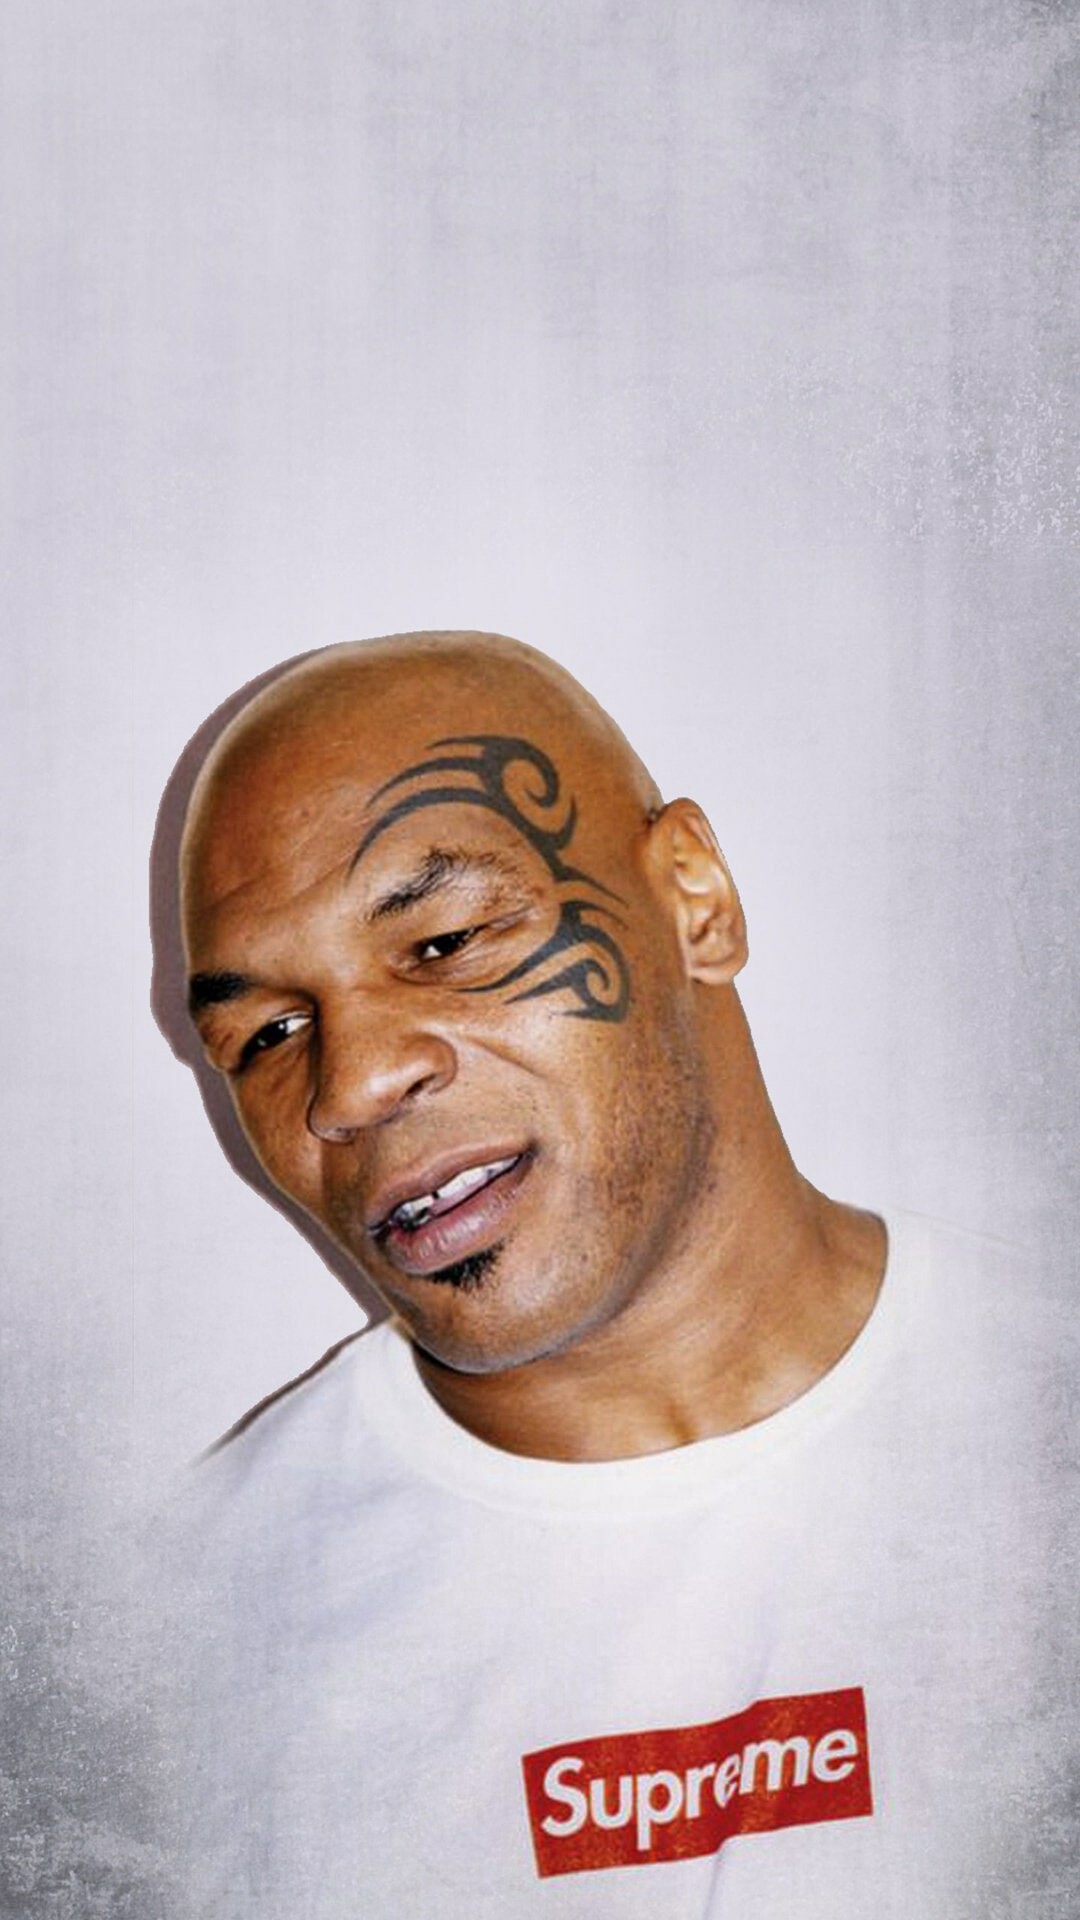 Mike Tyson: The Ring magazine's Fighter of the Year in 1986 and 1988, The Baddest Man on the Planet. 1080x1920 Full HD Wallpaper.